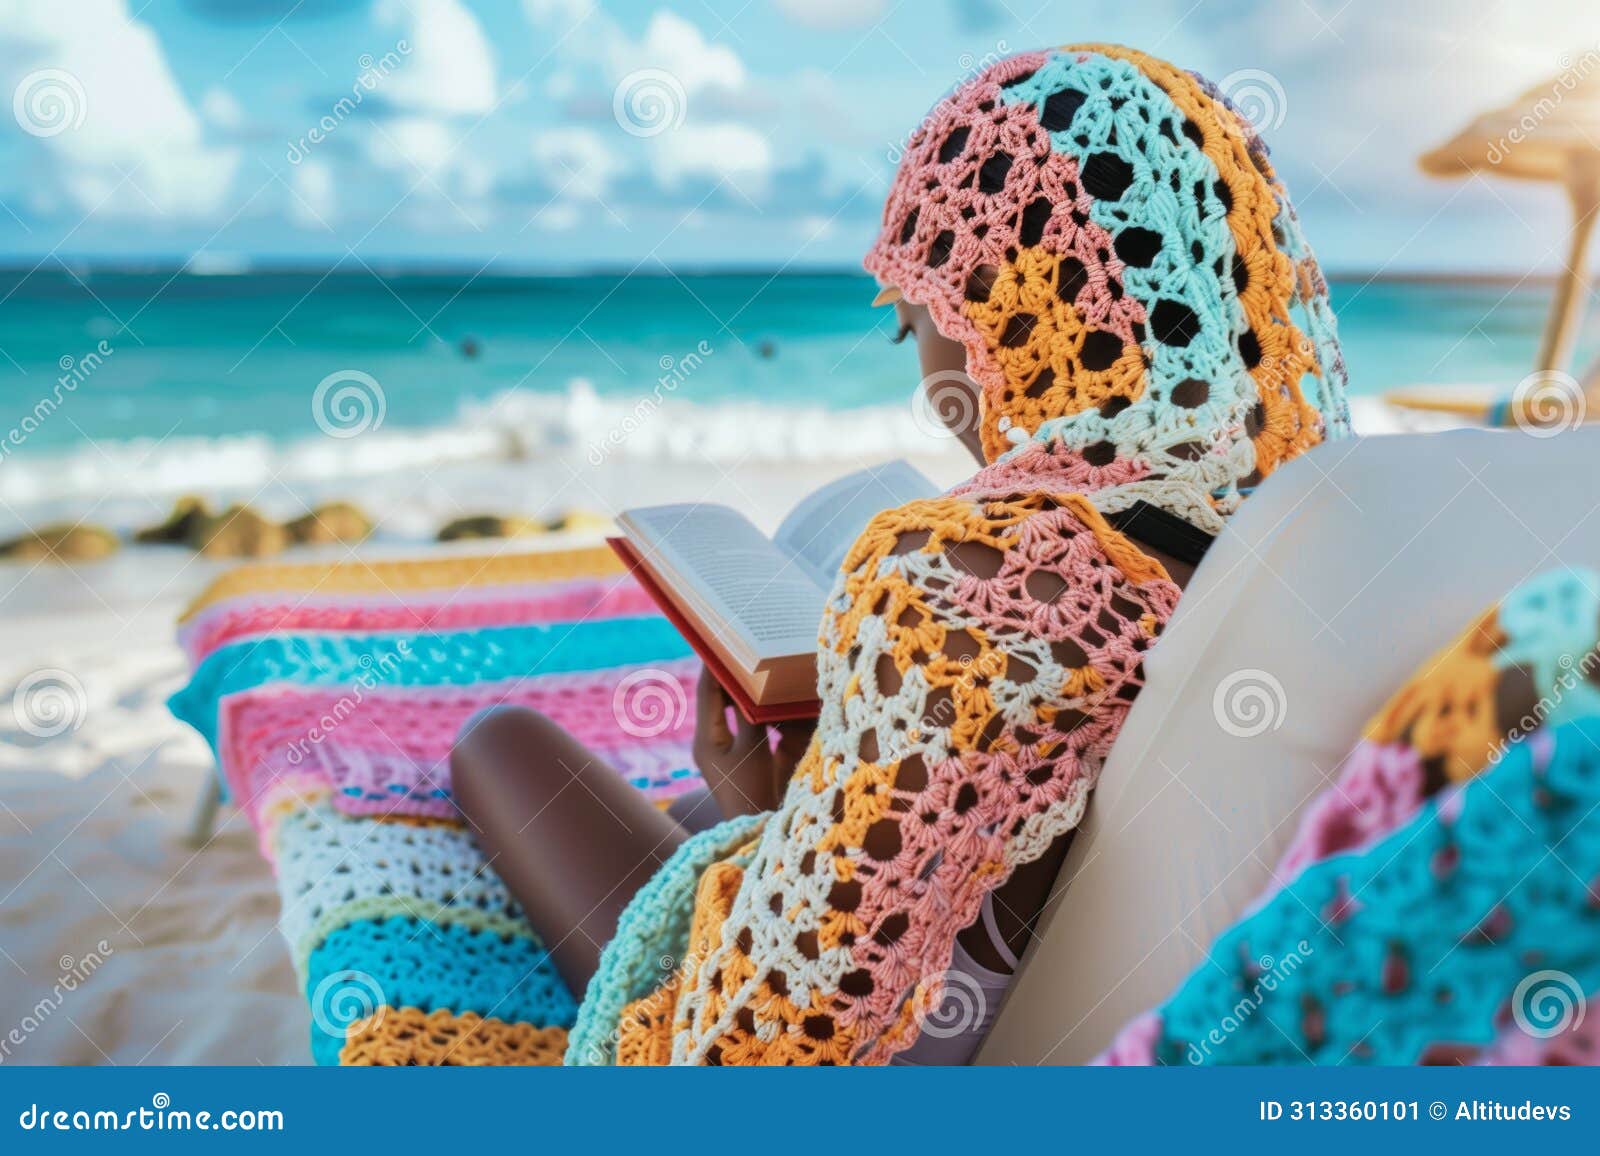 girl in a crochet coverup reading a book on a beach lounger